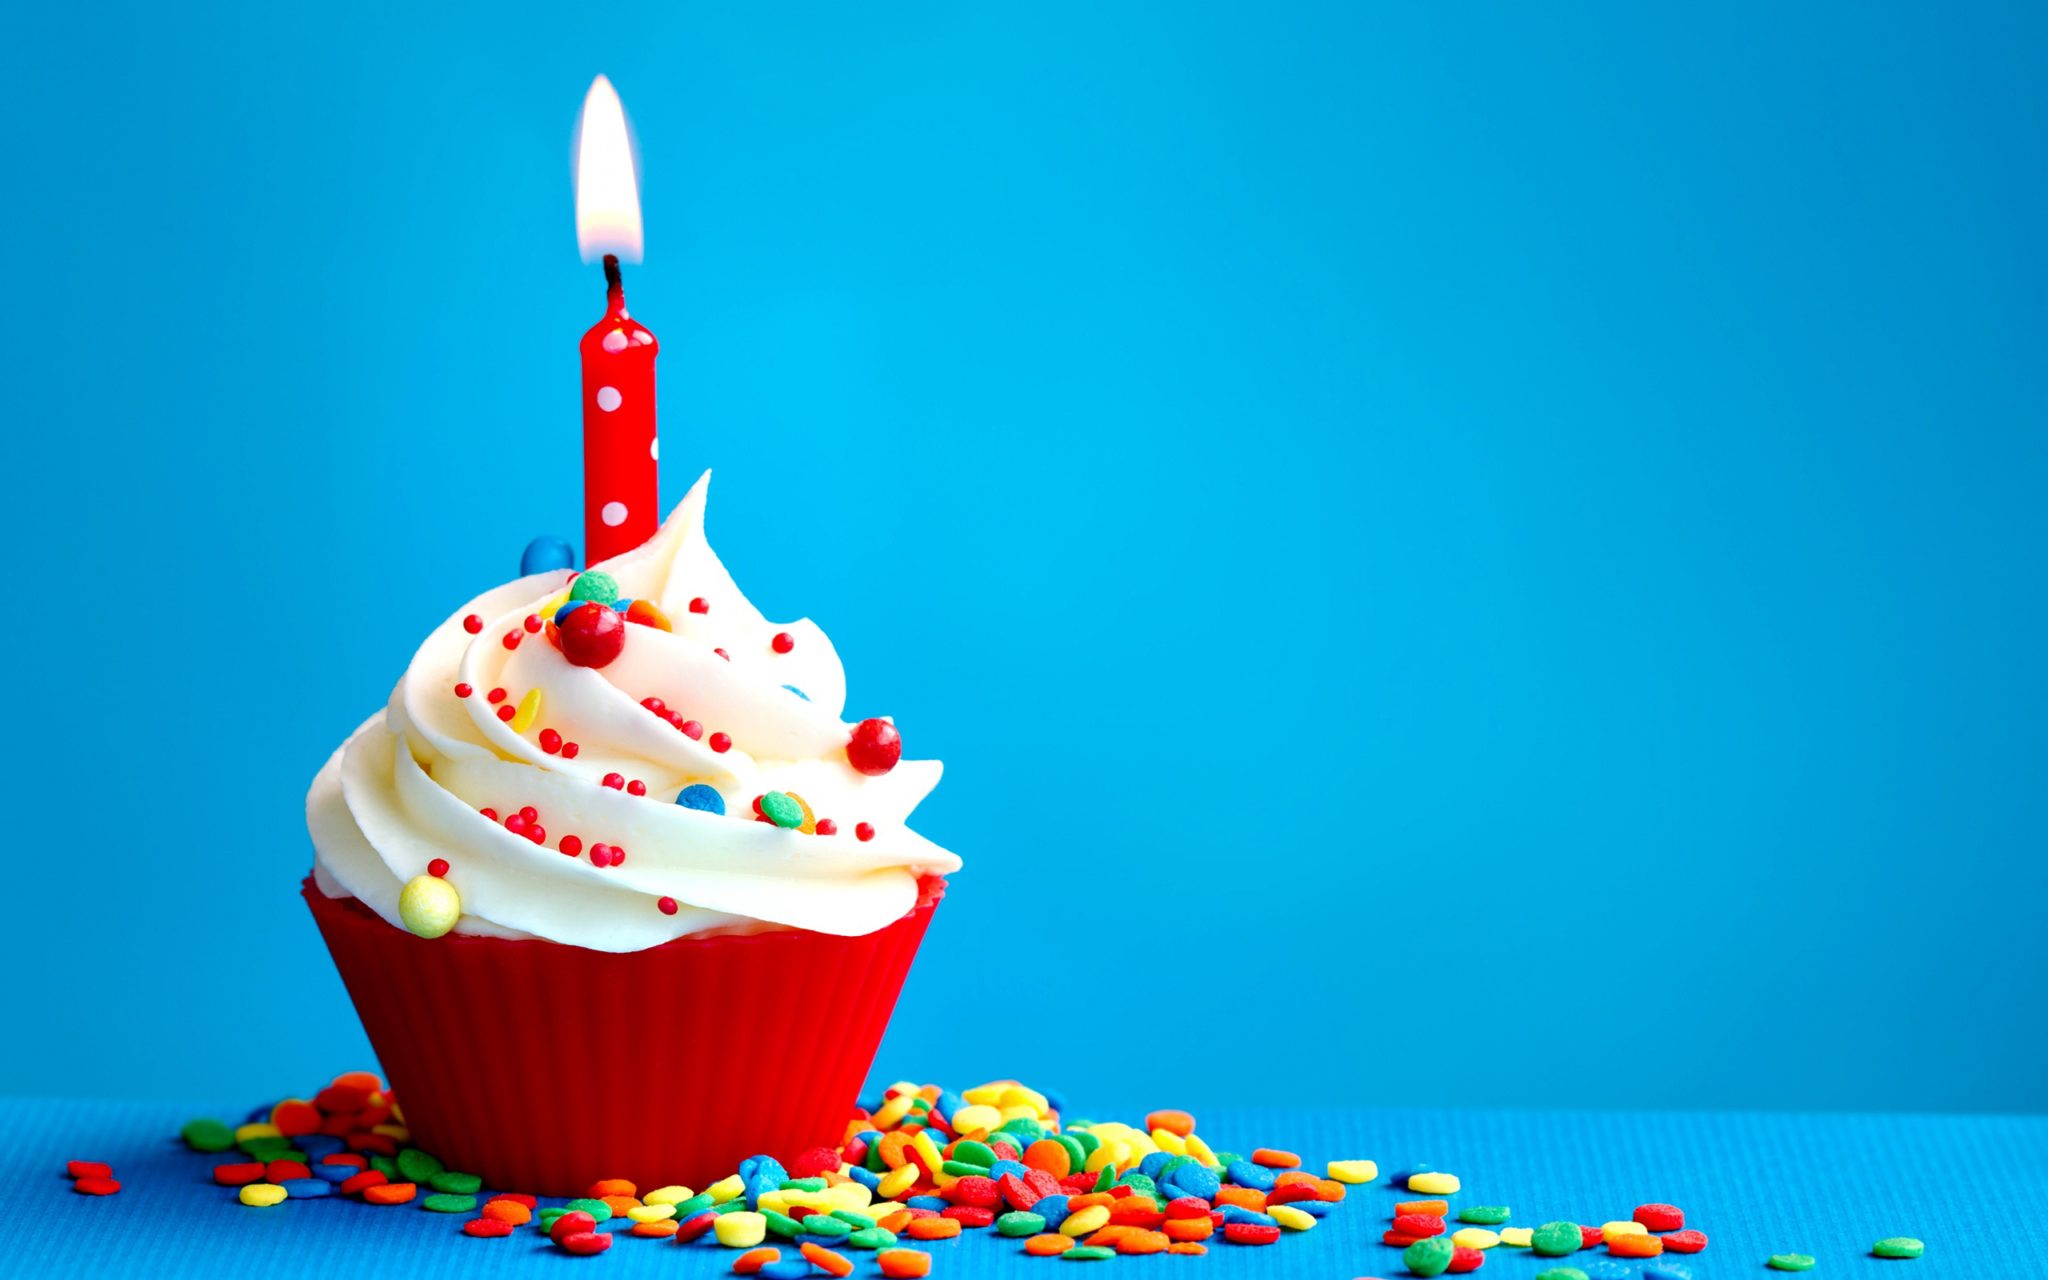 Happy Birthday Pictures - Best Birthday Pictures, Images and Wallpapers